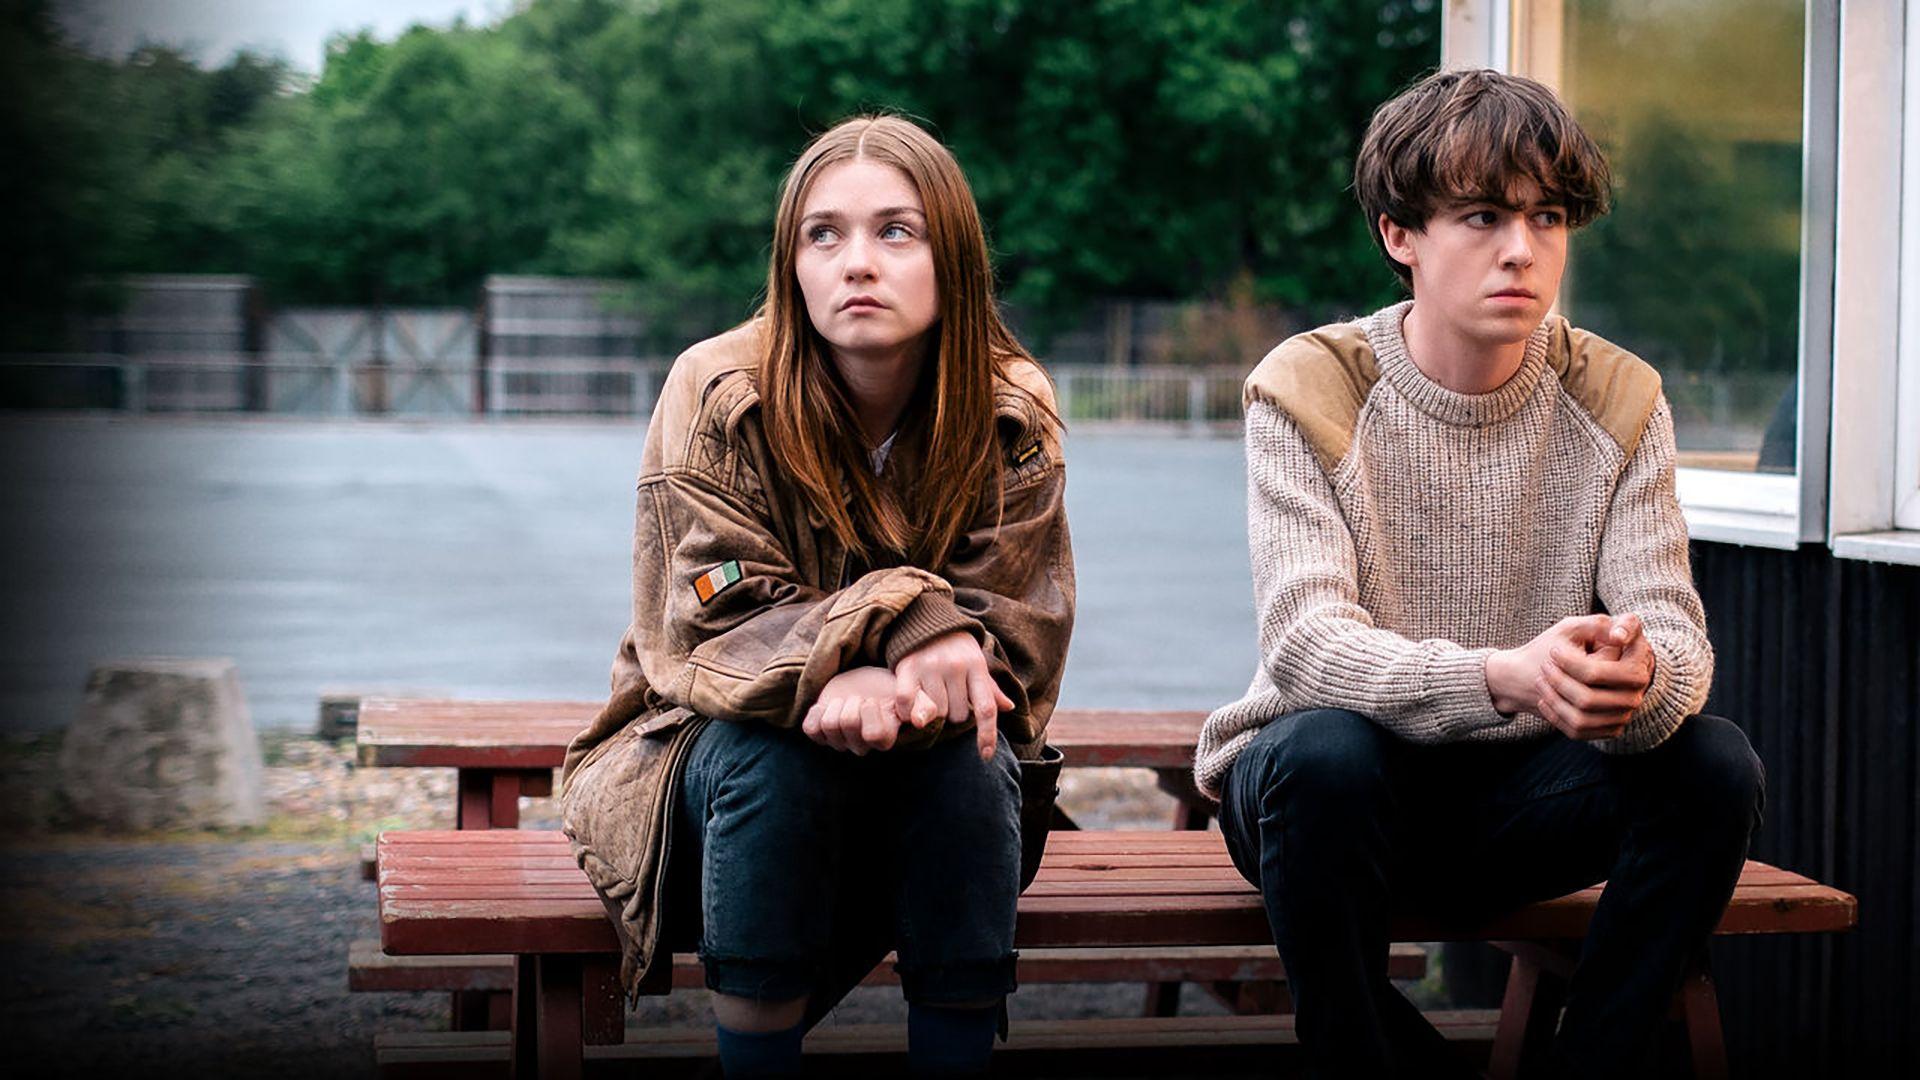 Review: The End of the F**cking World